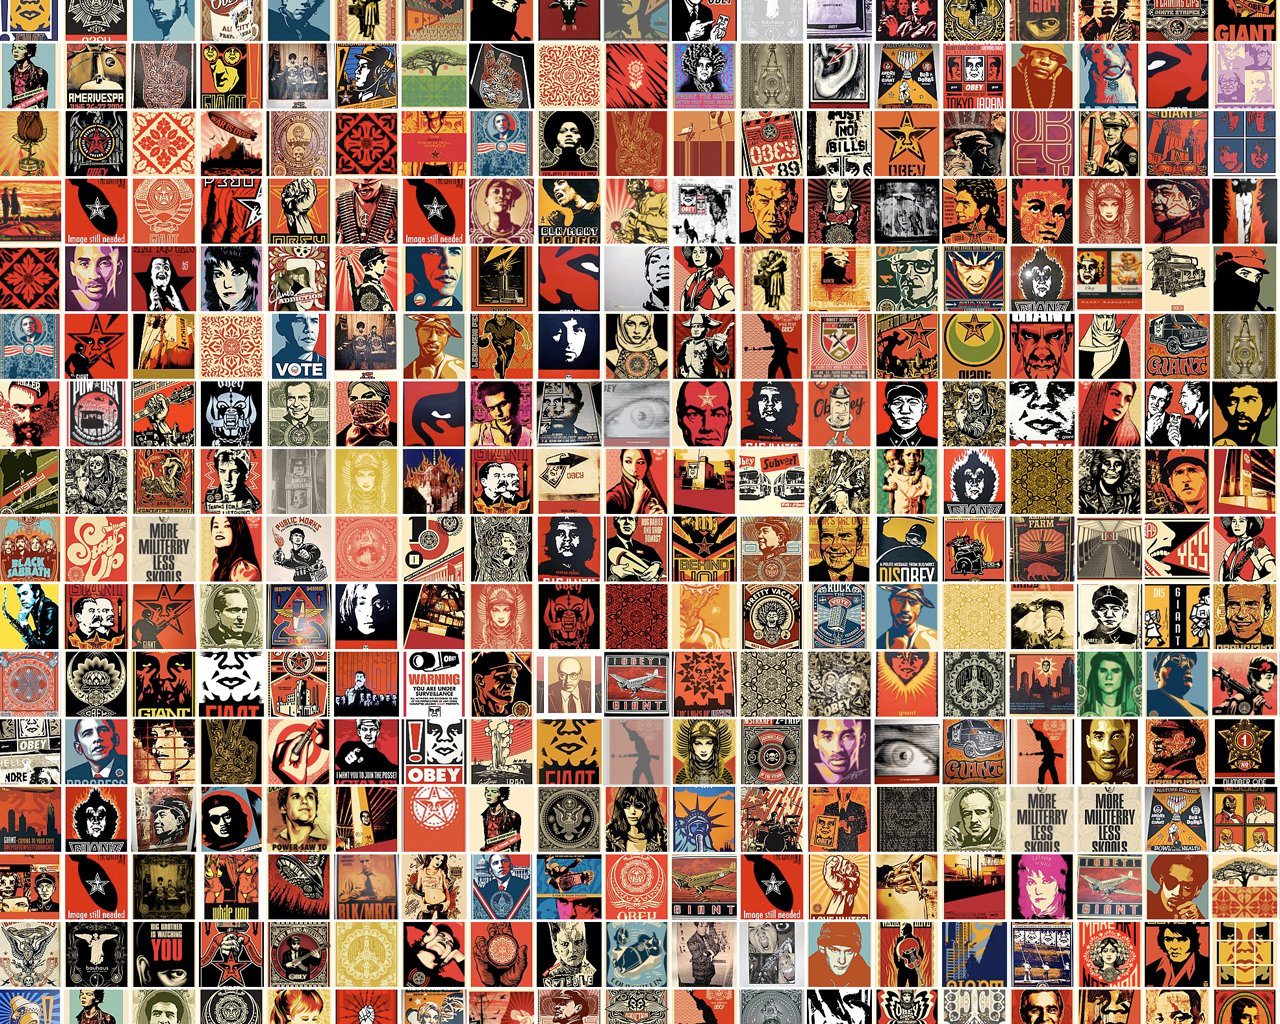 Obey Giant Collage Wallpaper 1280x1024